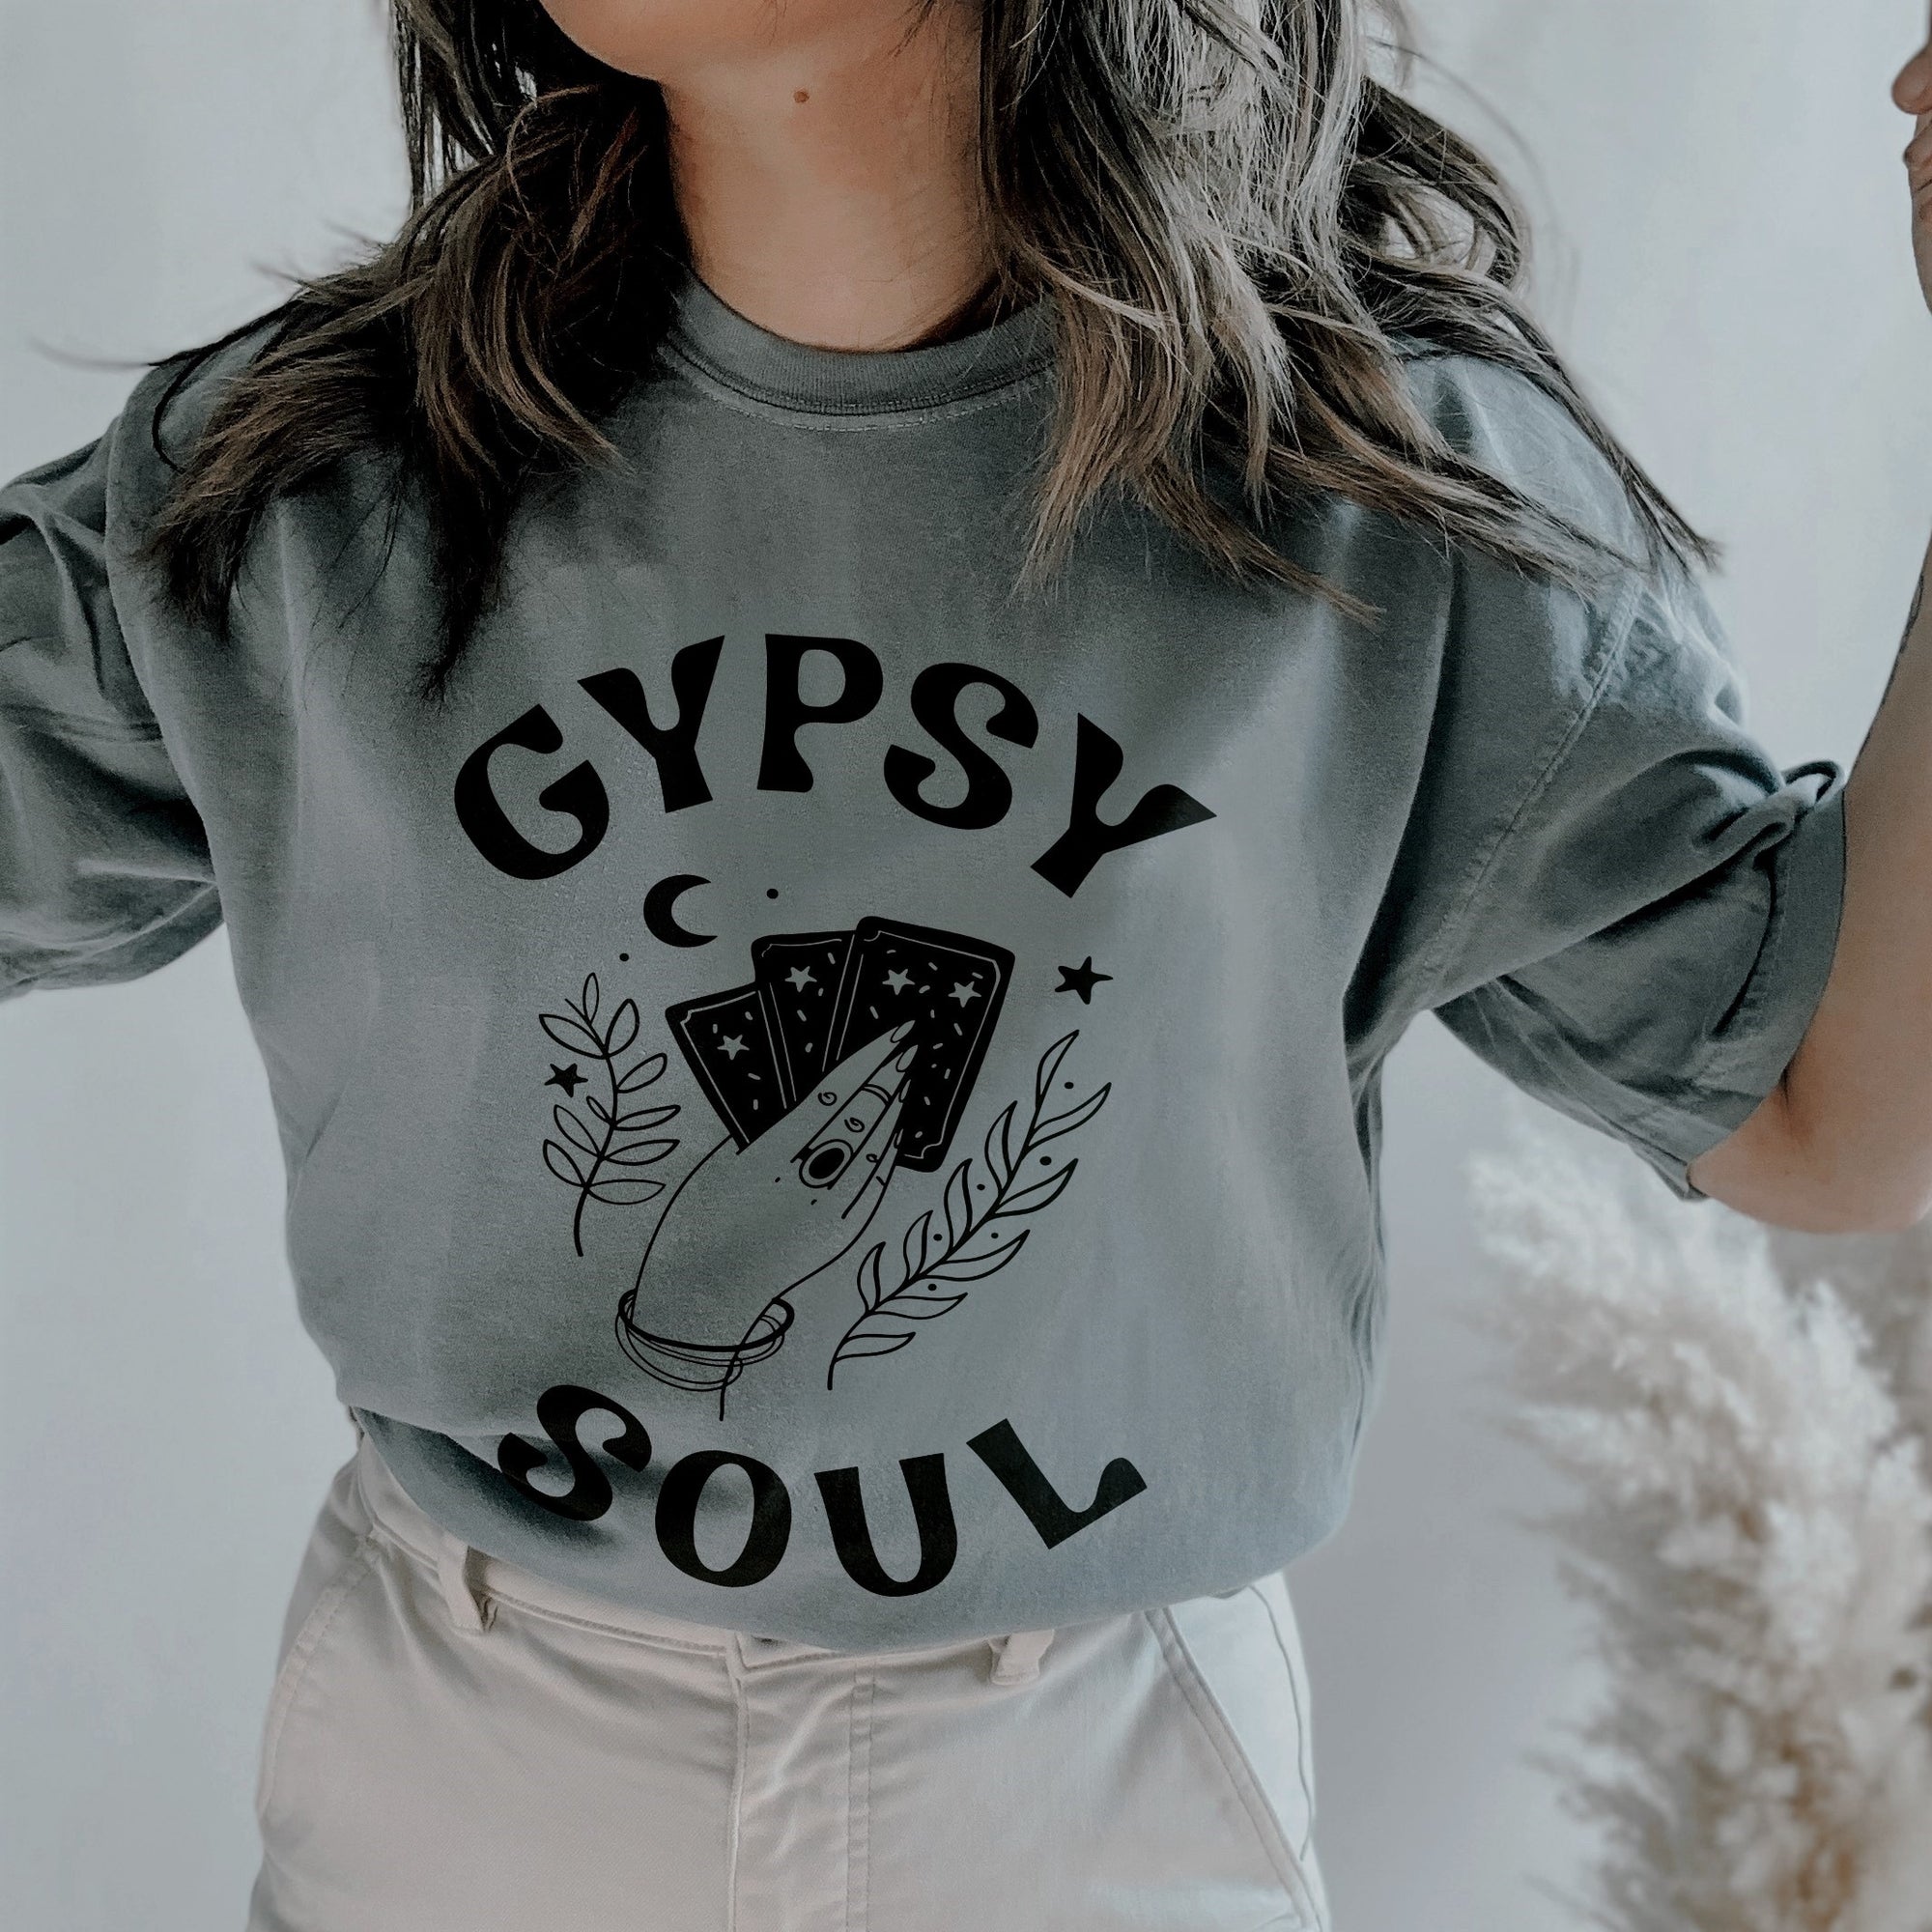 Gypsy Soul Graphic Tee Shirt (Wholesale)